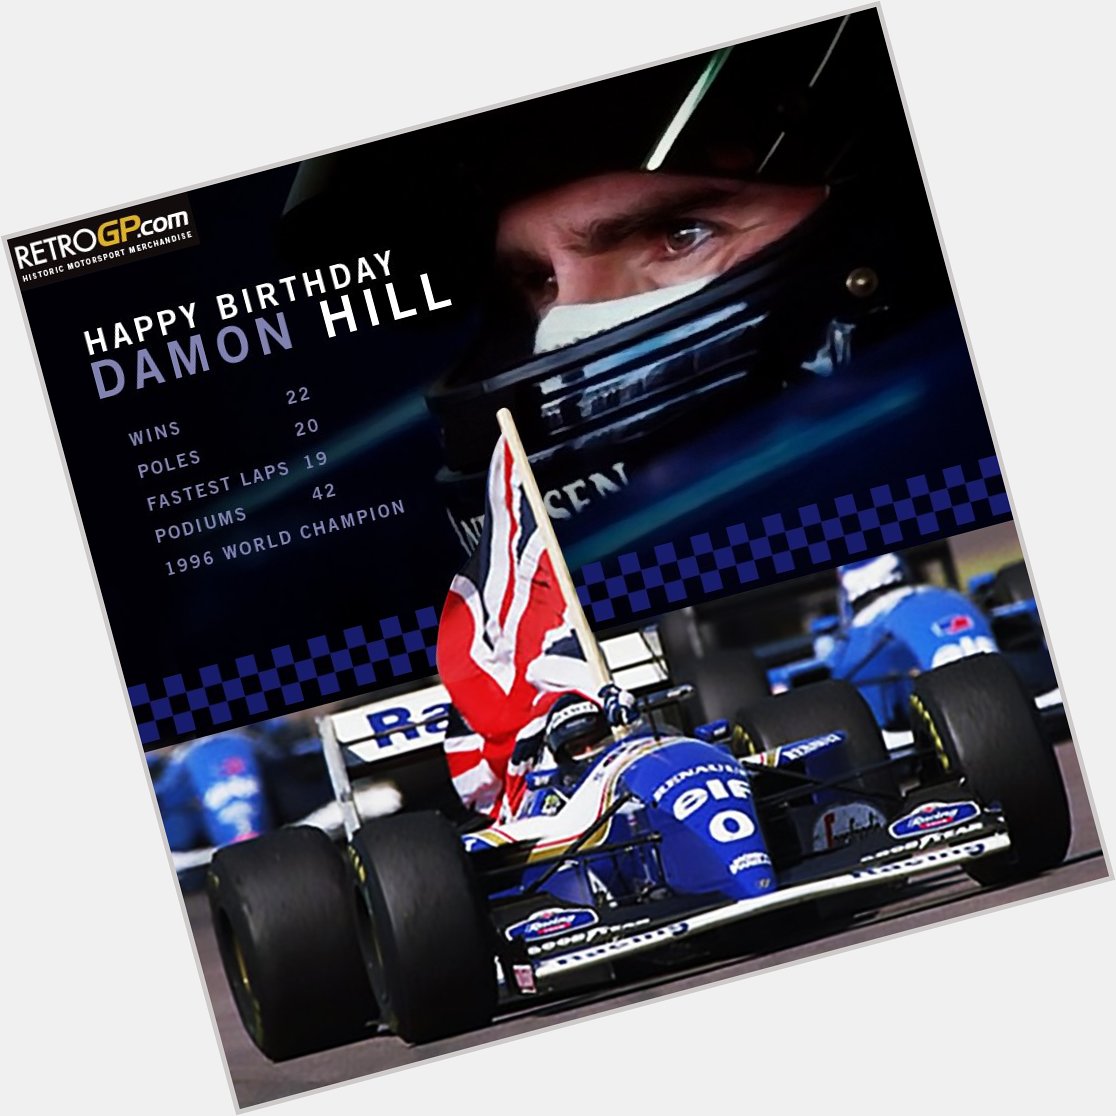 Happy Birthday to 96 World Champ Damon Hill 57 but has to work today at Poor thing! 